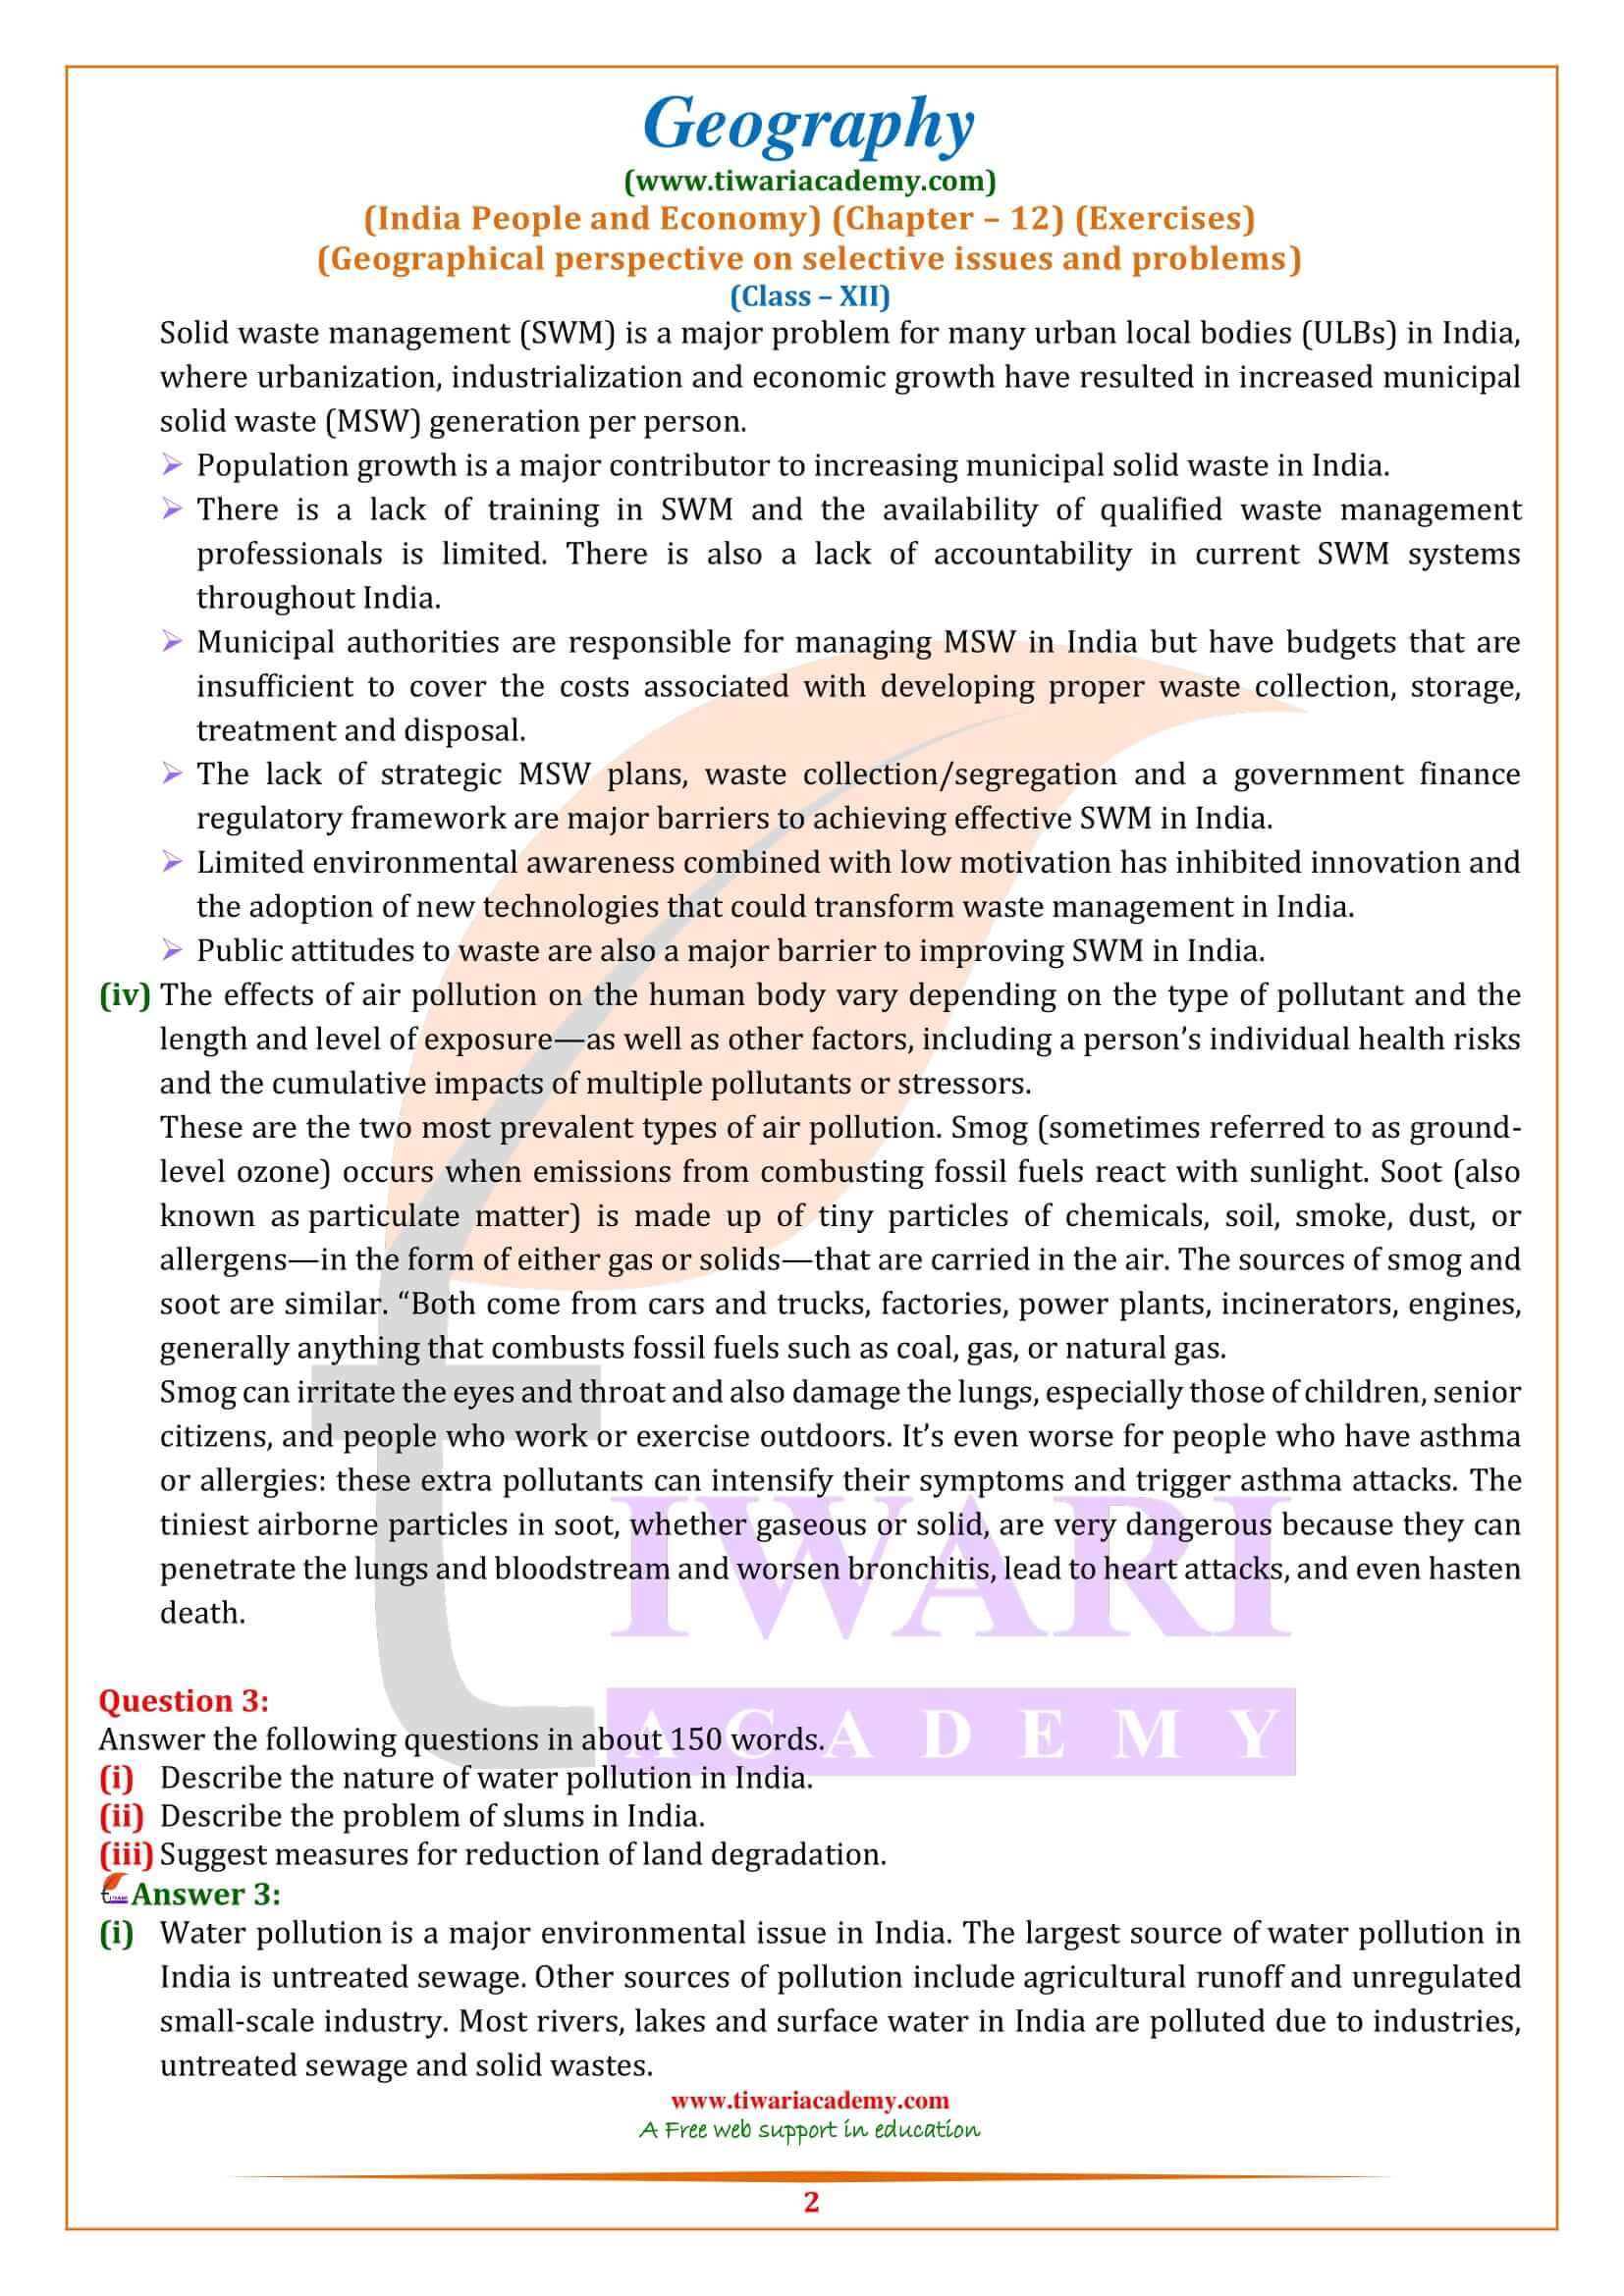 NCERT Solutions for Class 12 Geography Chapter 12 in English Medium